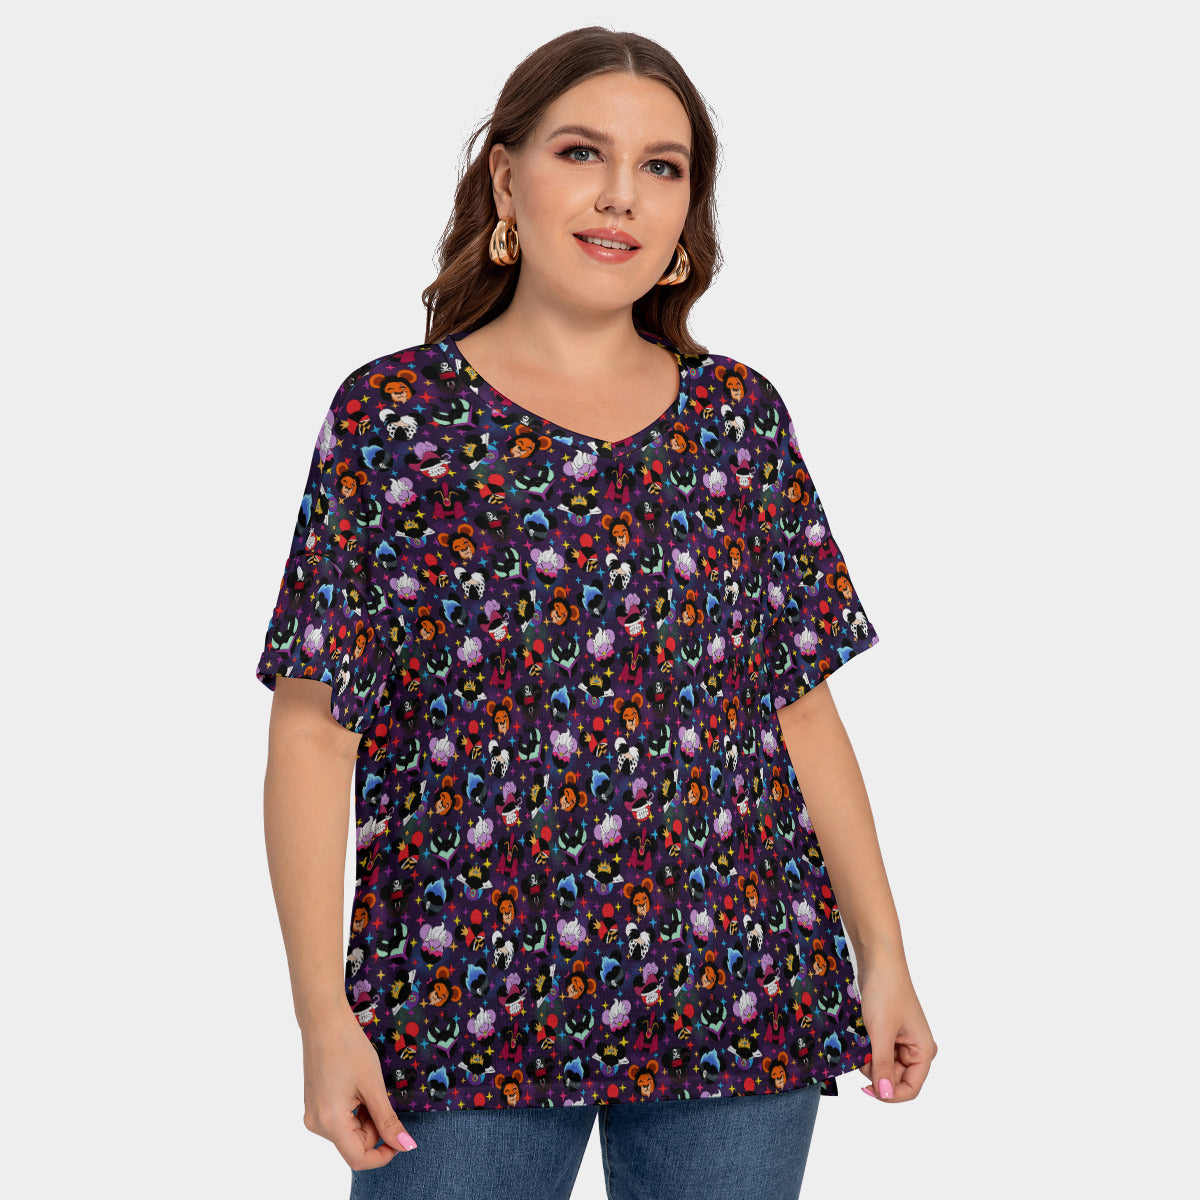 Villains Women's Plus Size Short Sleeve T-shirt With Sleeve Loops